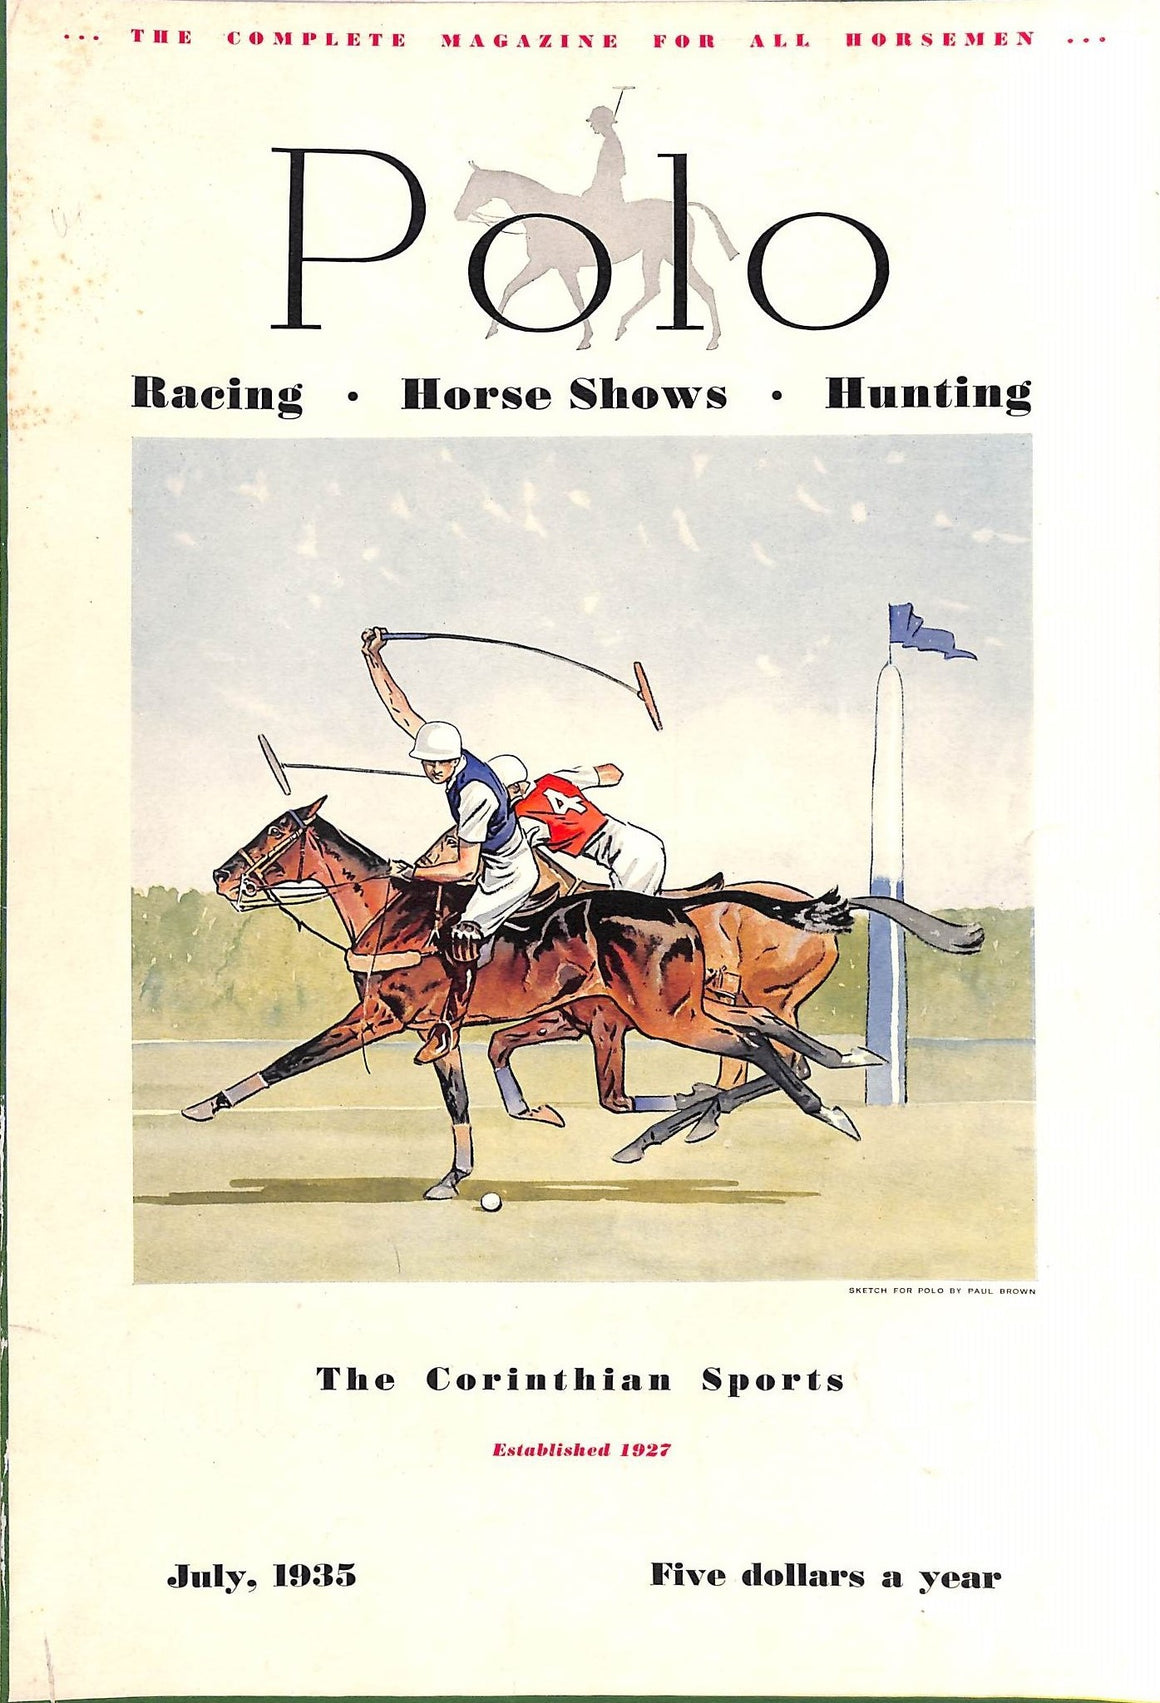 "Polo Magazine July, 1935" w/ Paul Brown Cover